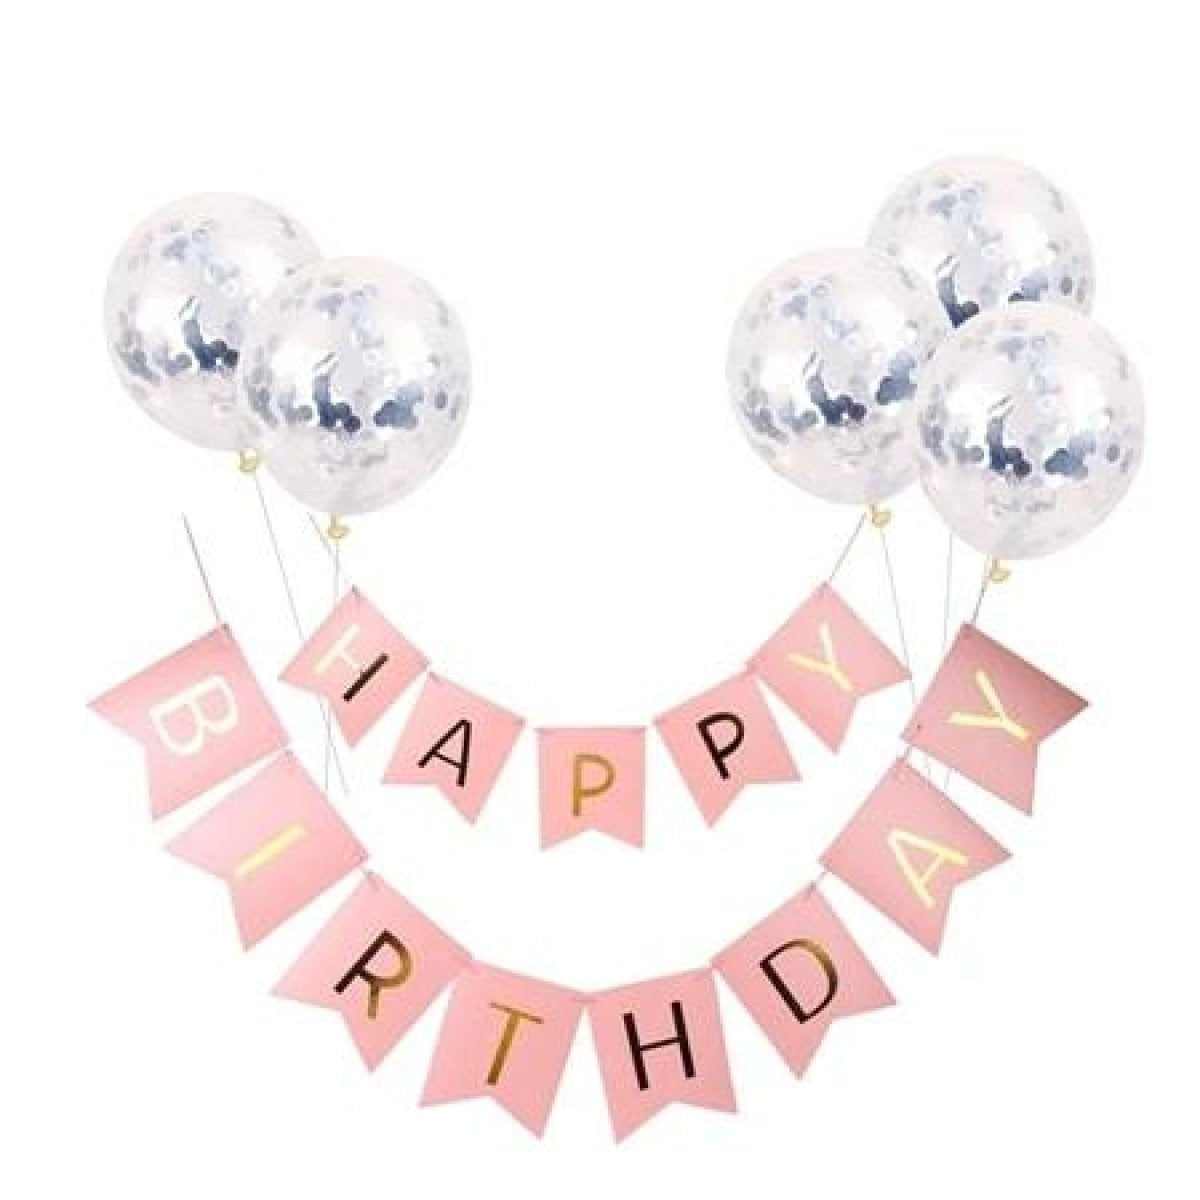 Happy Birthday Balloon Banner Set Confetti Balloons Party Decorations Boy Girl | L | Asia Sell